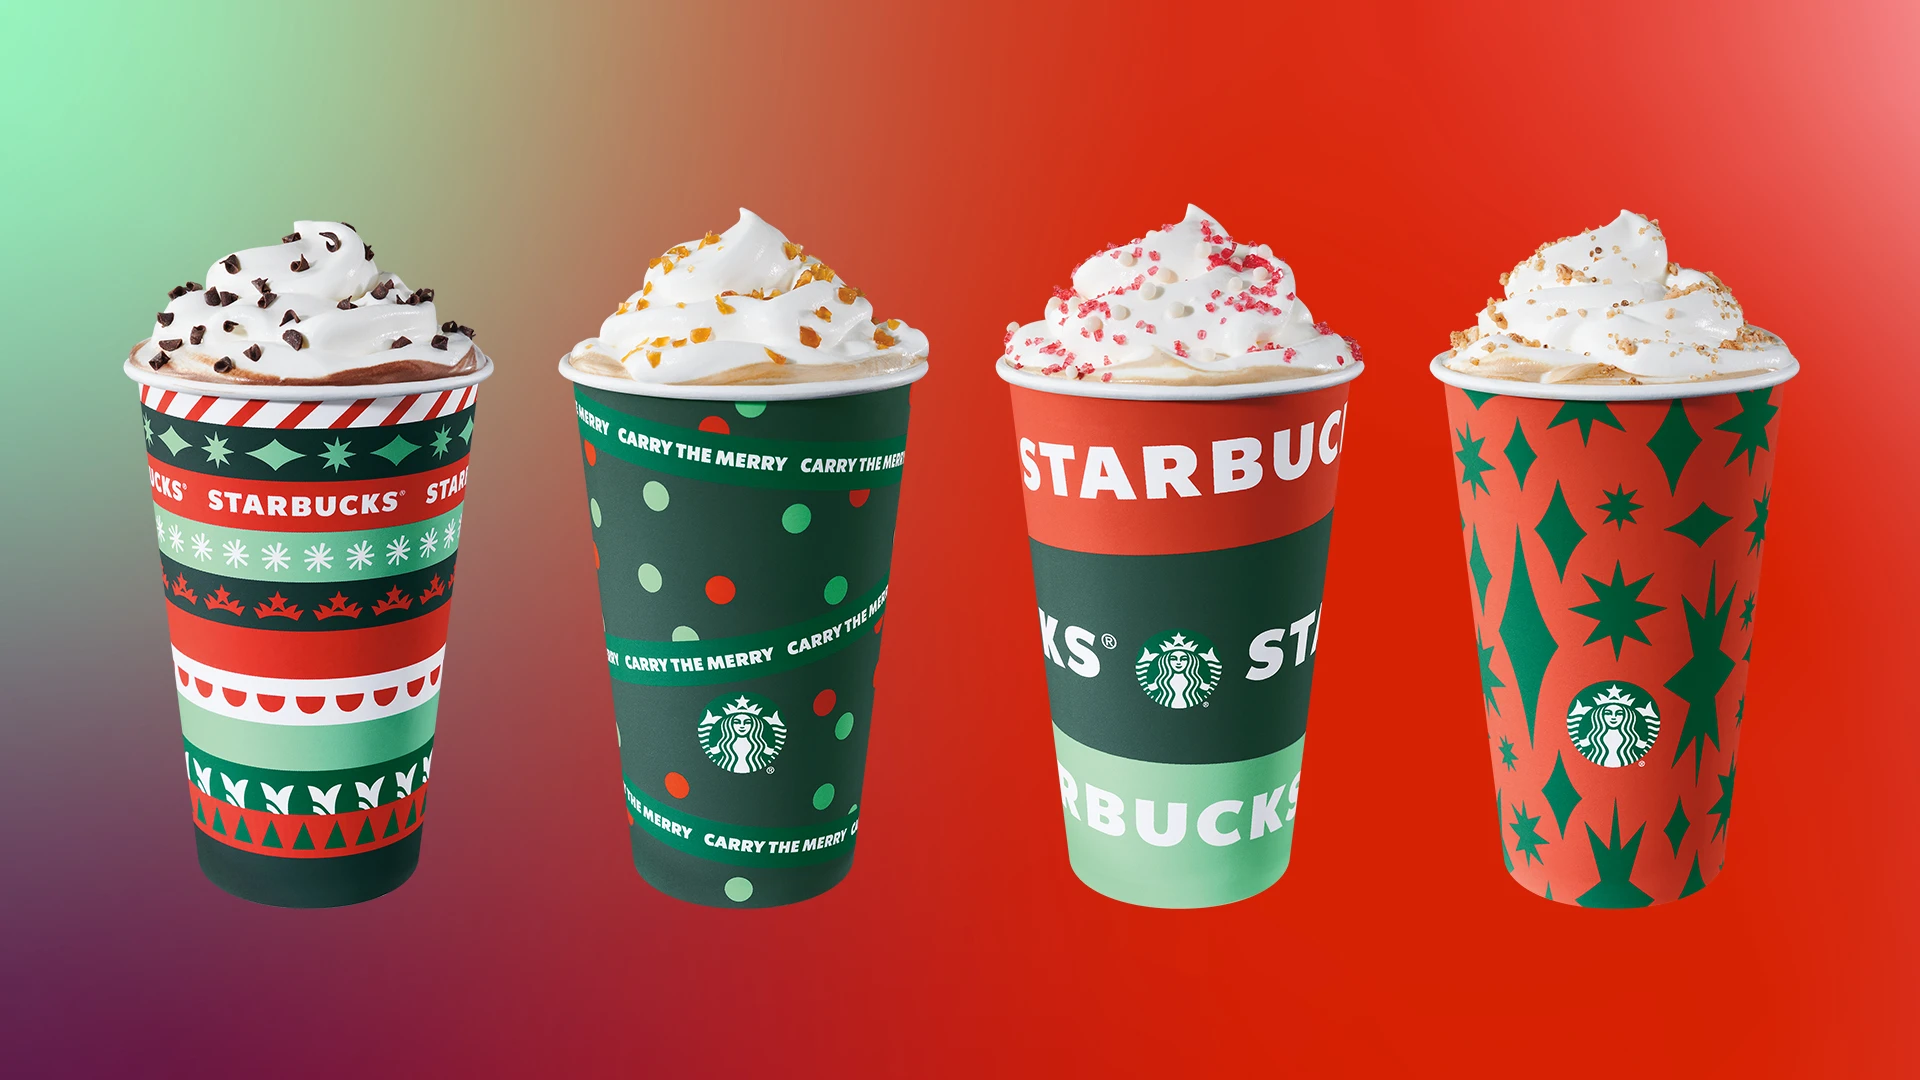 Starbucks Red Cup Day is today